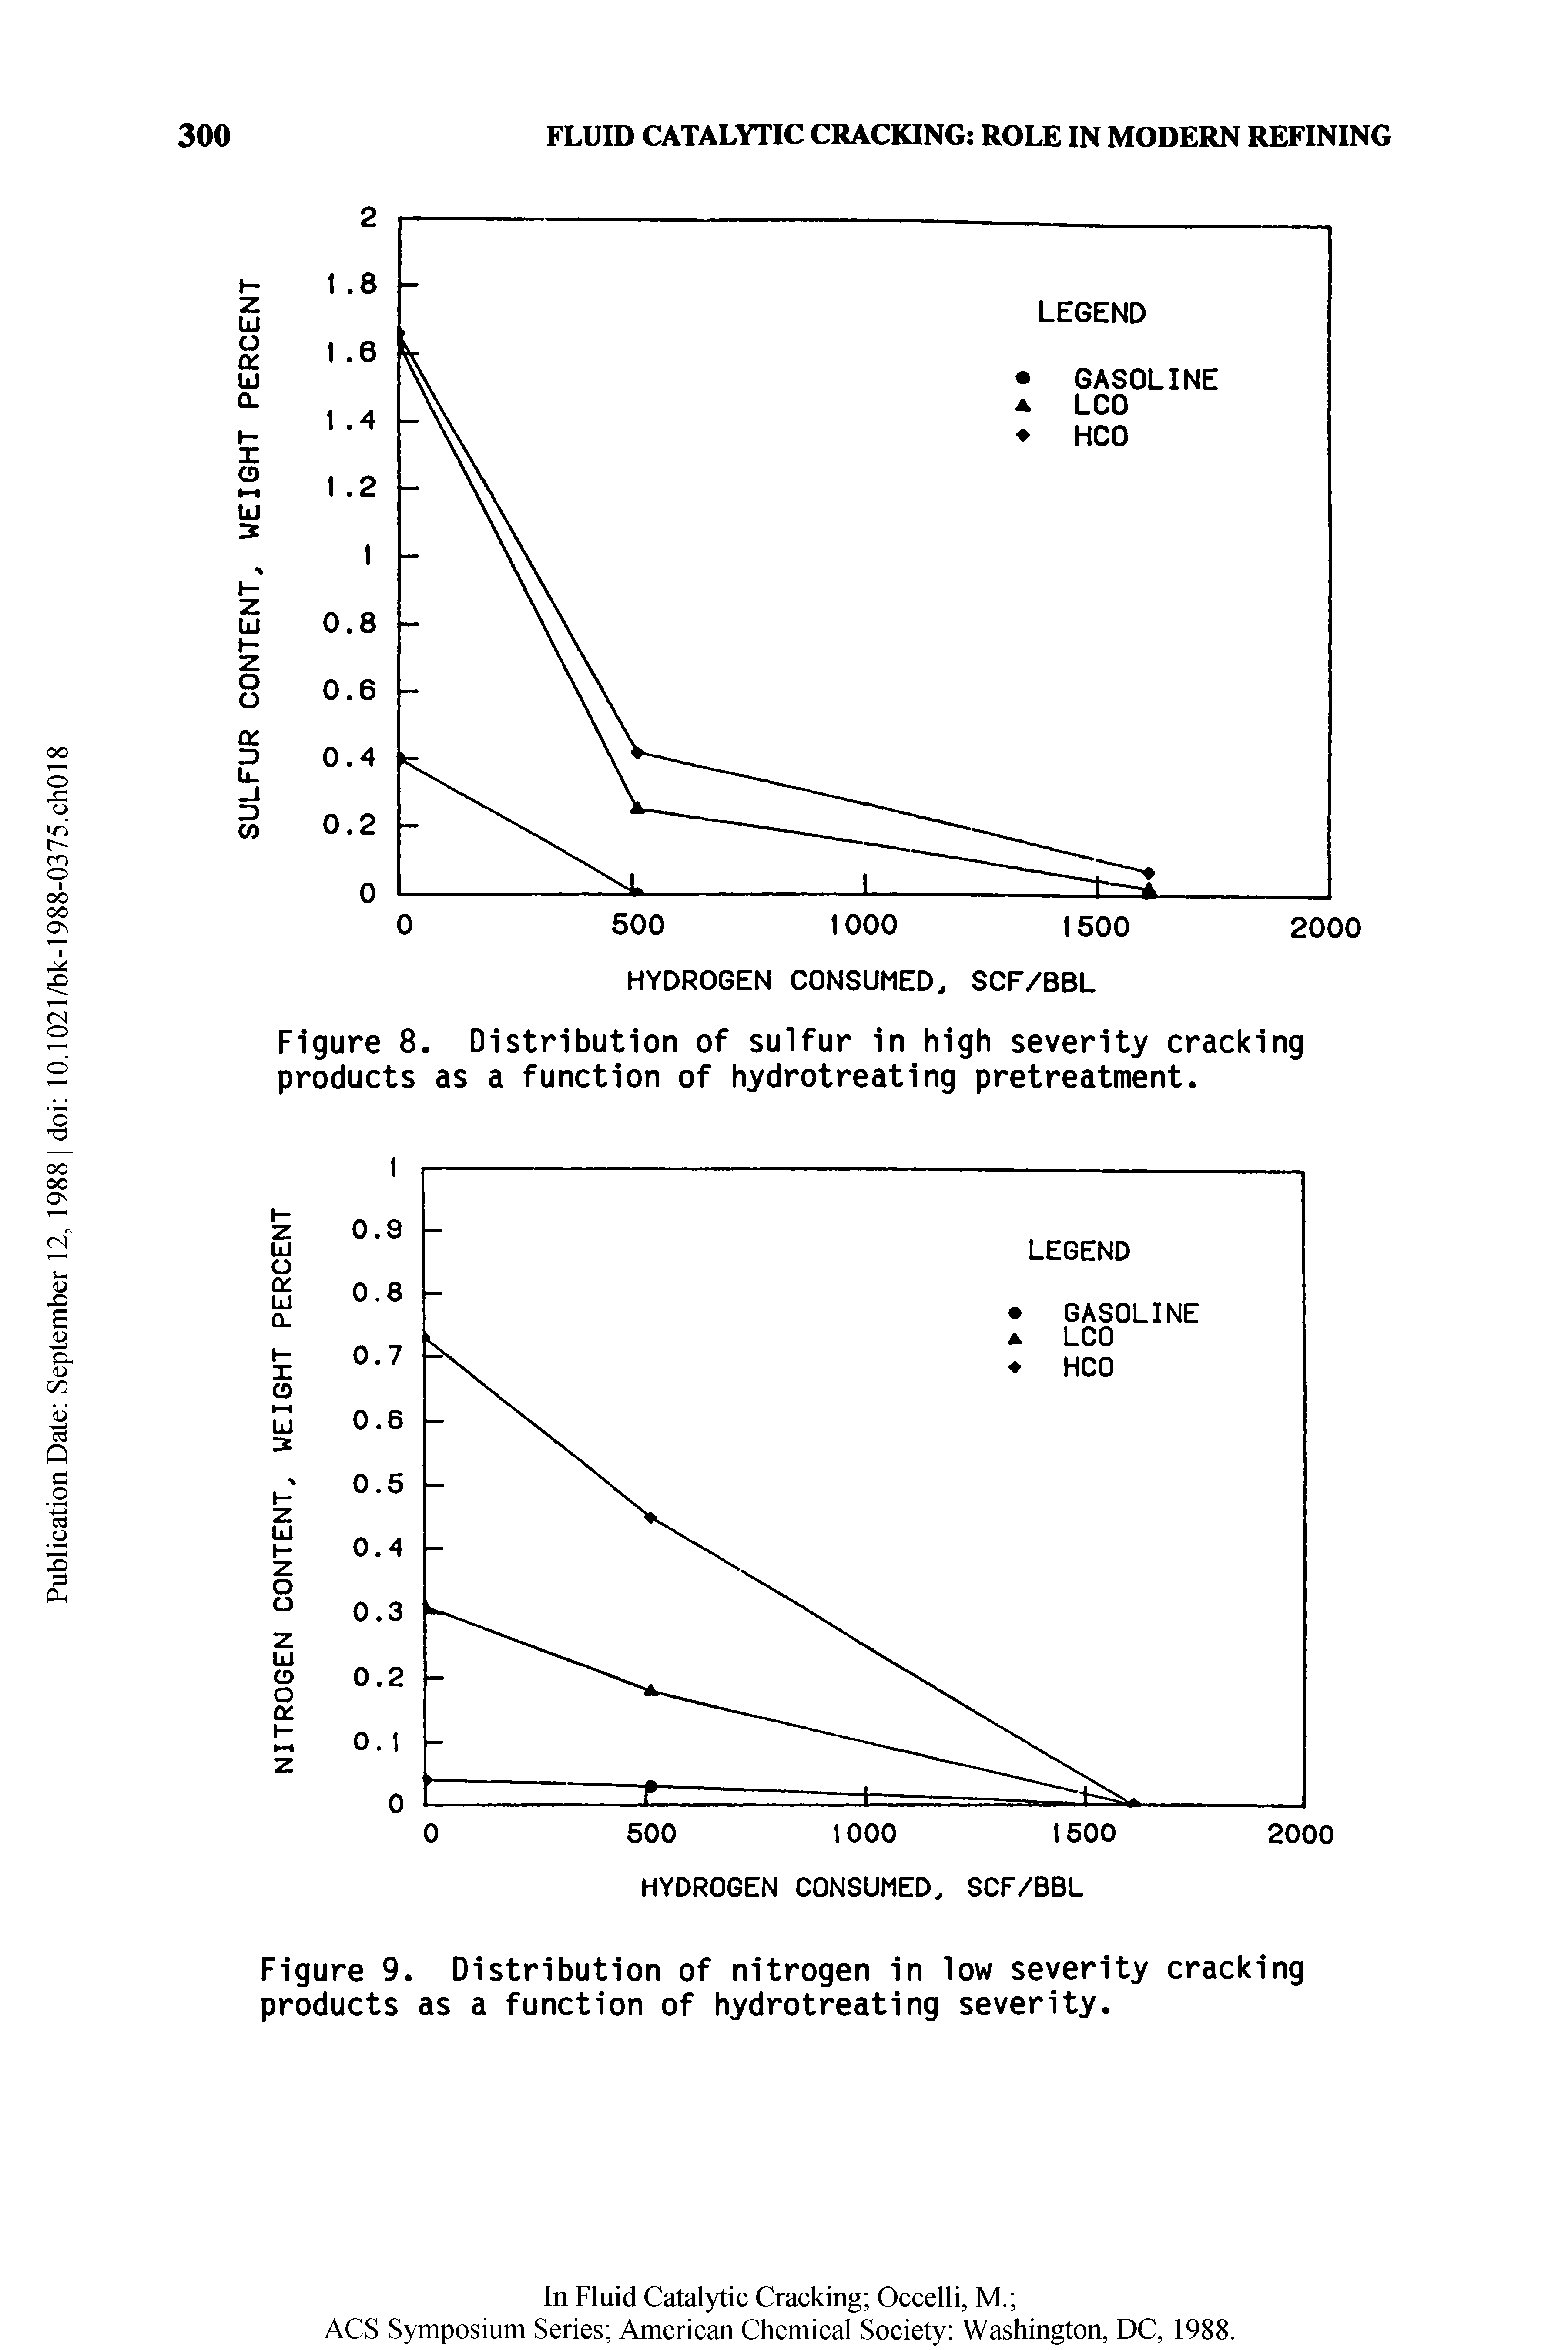 Figure 9. Distribution of nitrogen in low severity cracking products as a function of hydrotreating severity.